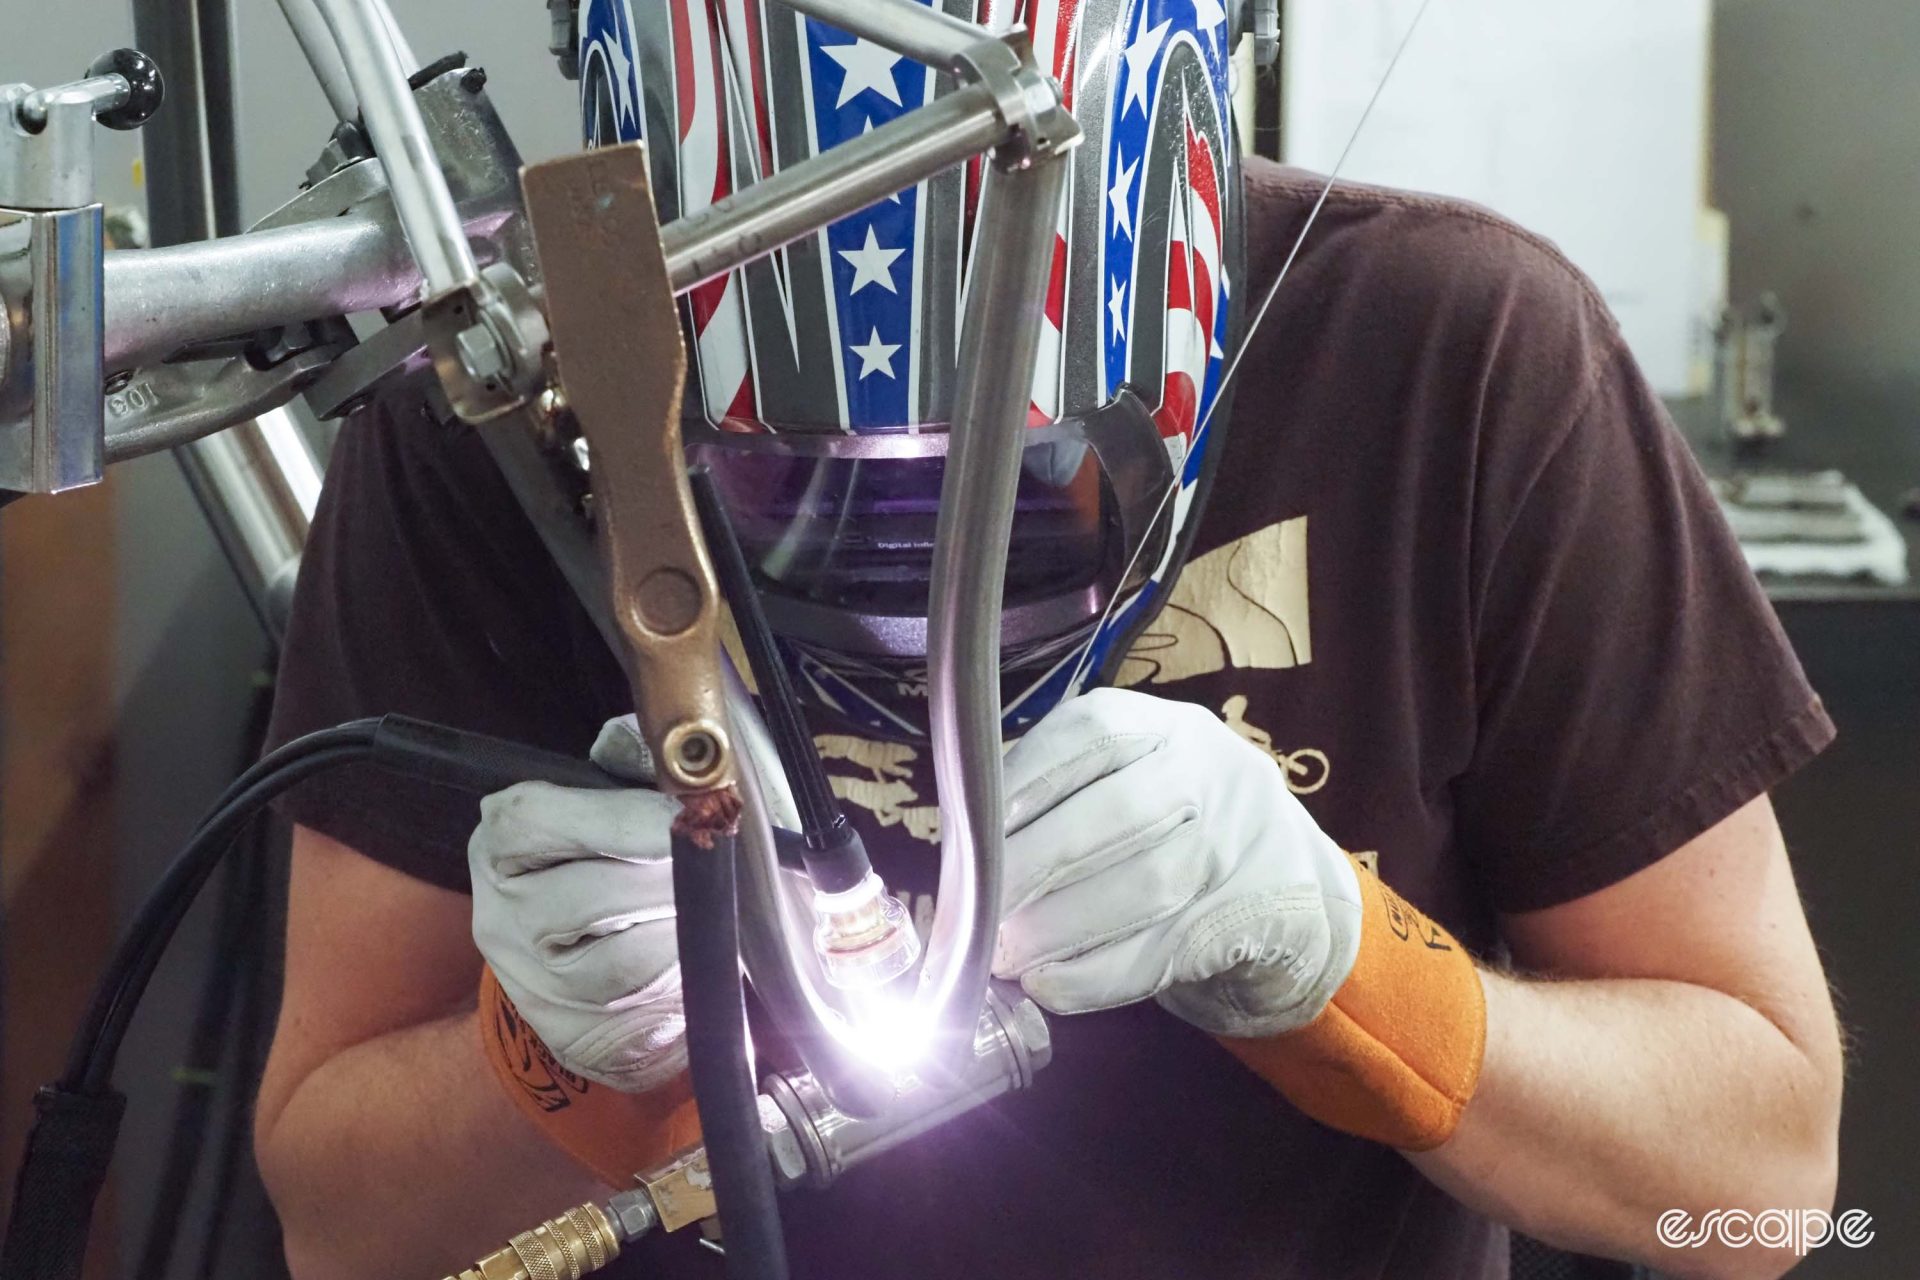 Another view of welding the bottom bracket, showing the welder with a torch in one hand, welding rod in another.